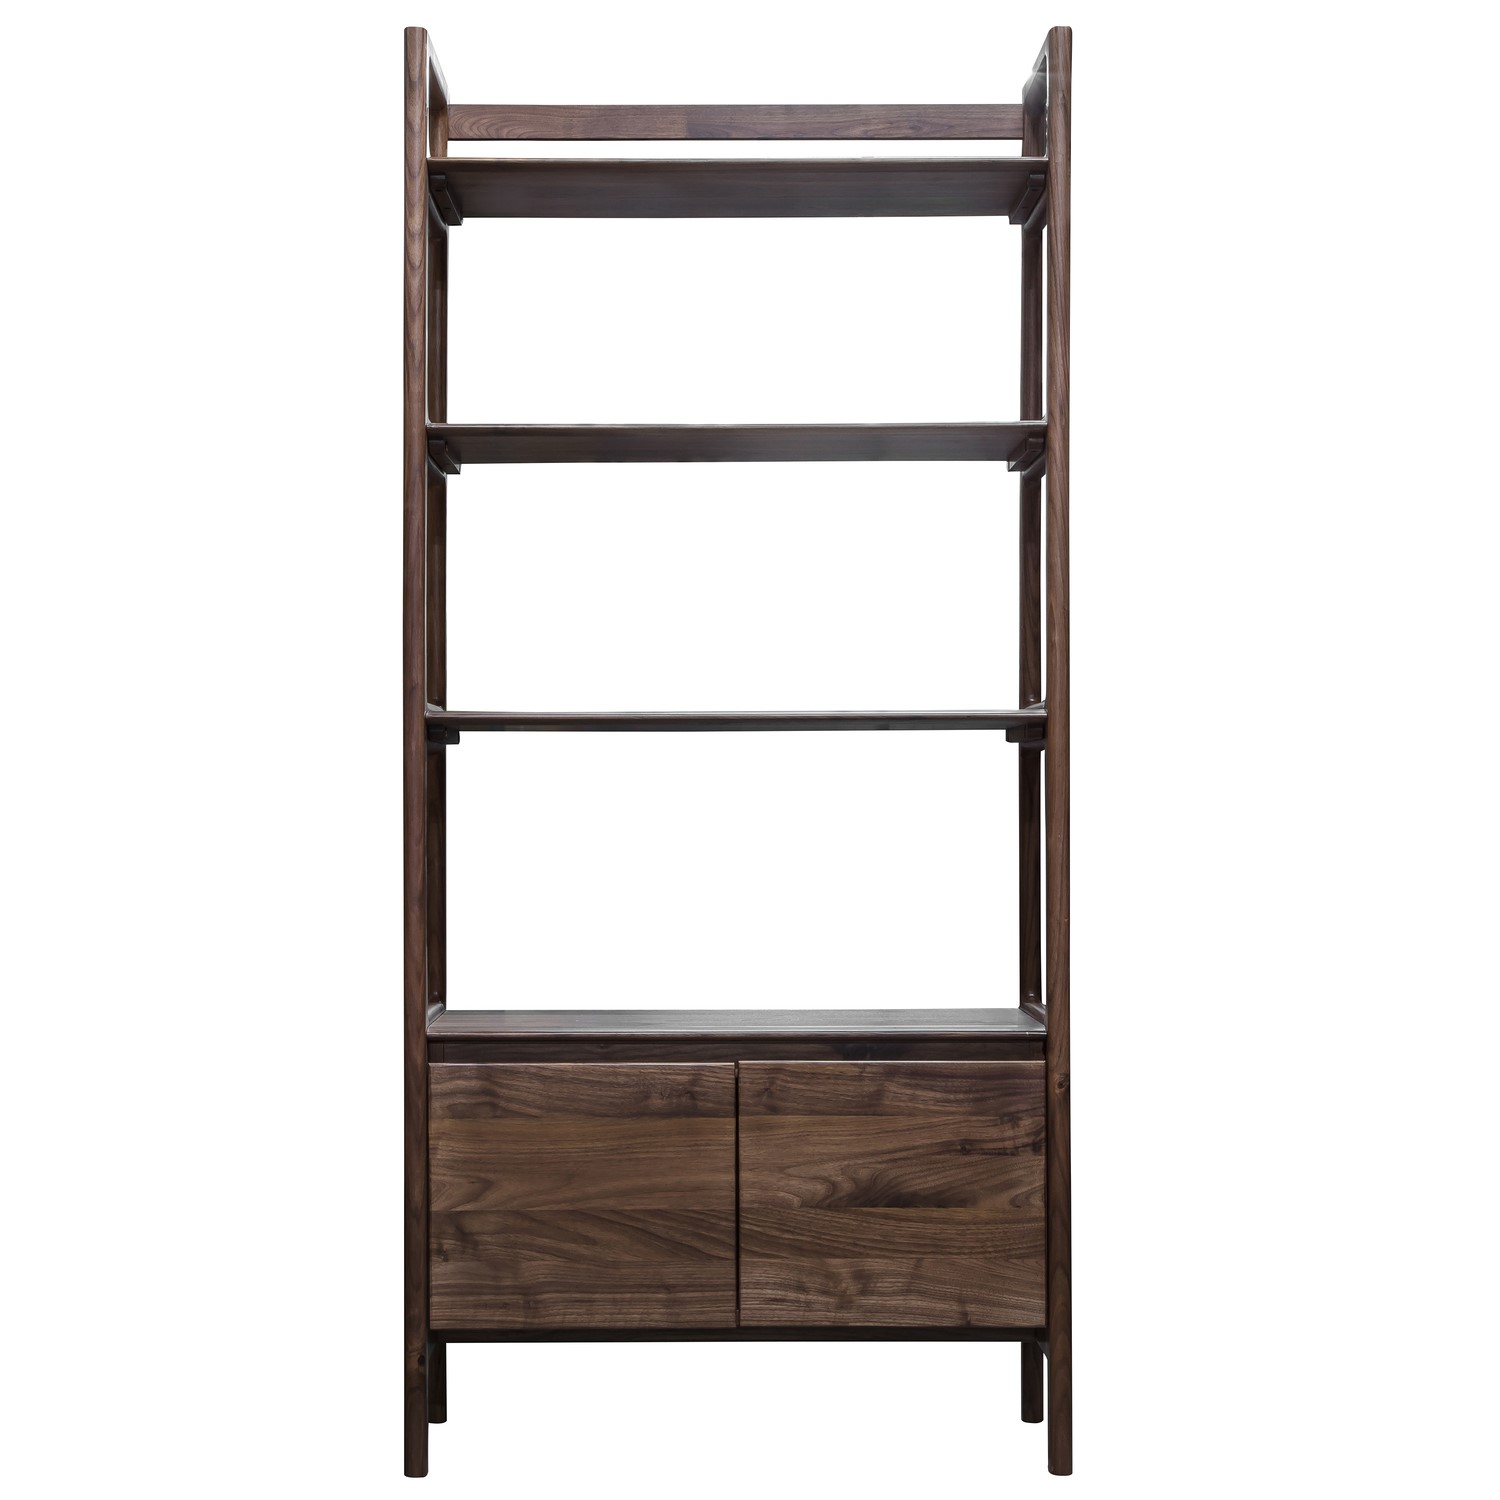 Photo of Madrid bookcase with open display walnut - caspian house